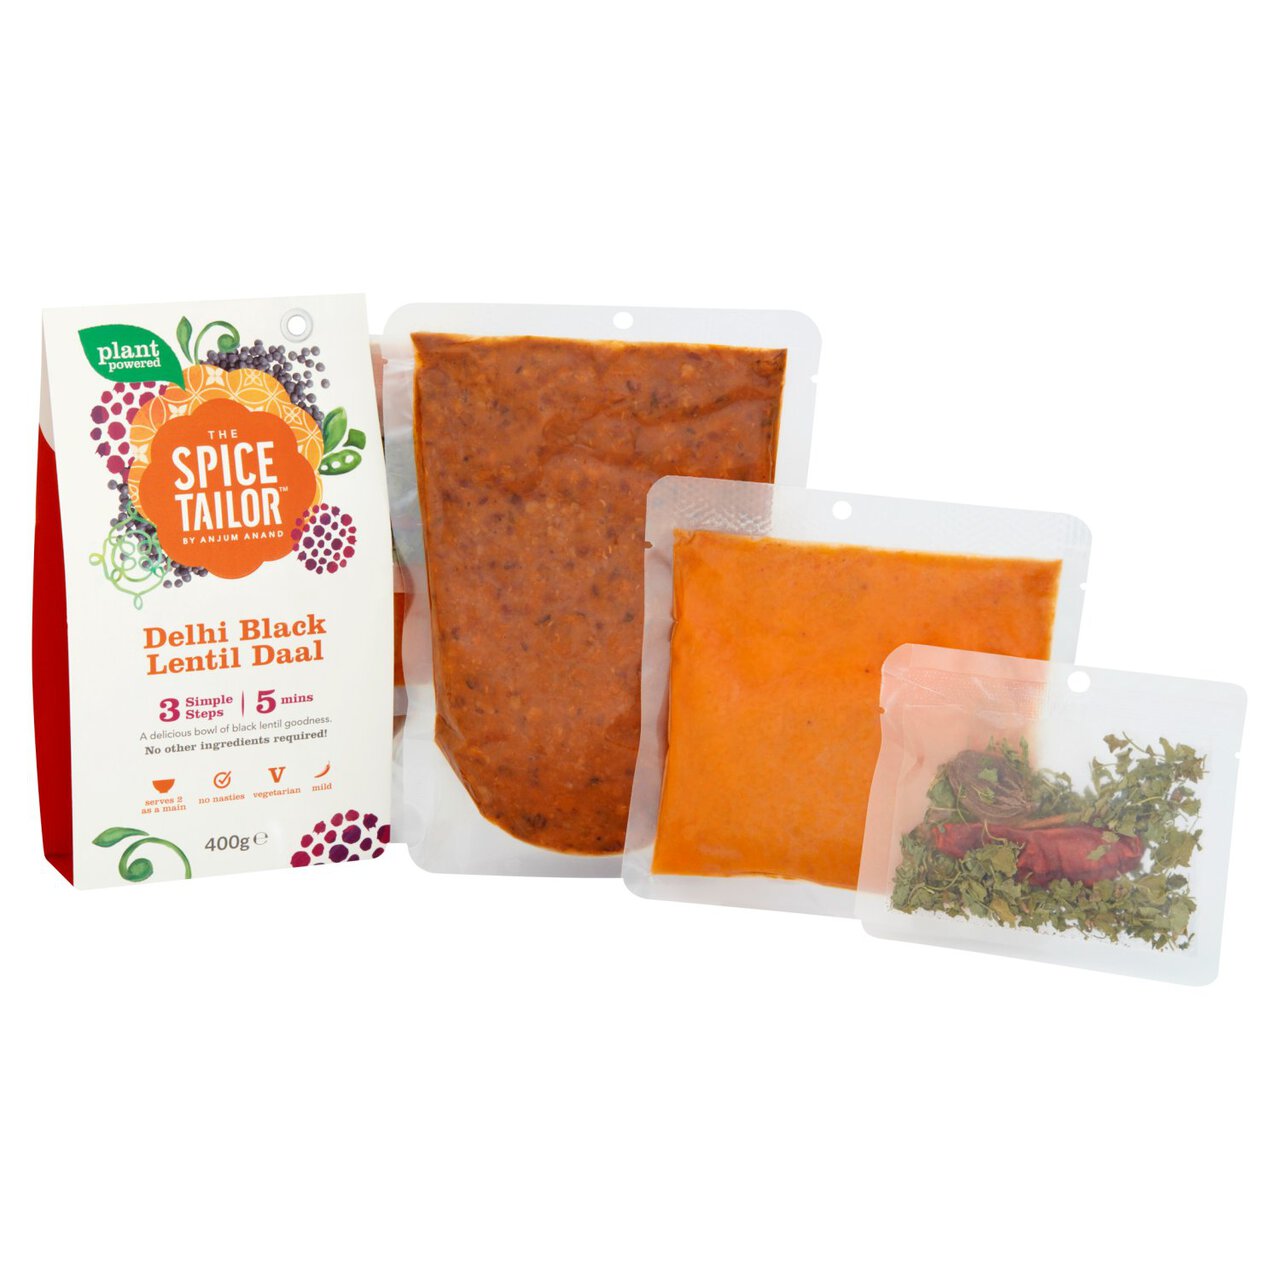 The Spice Tailor Delhi Black Makhani Daal 400g